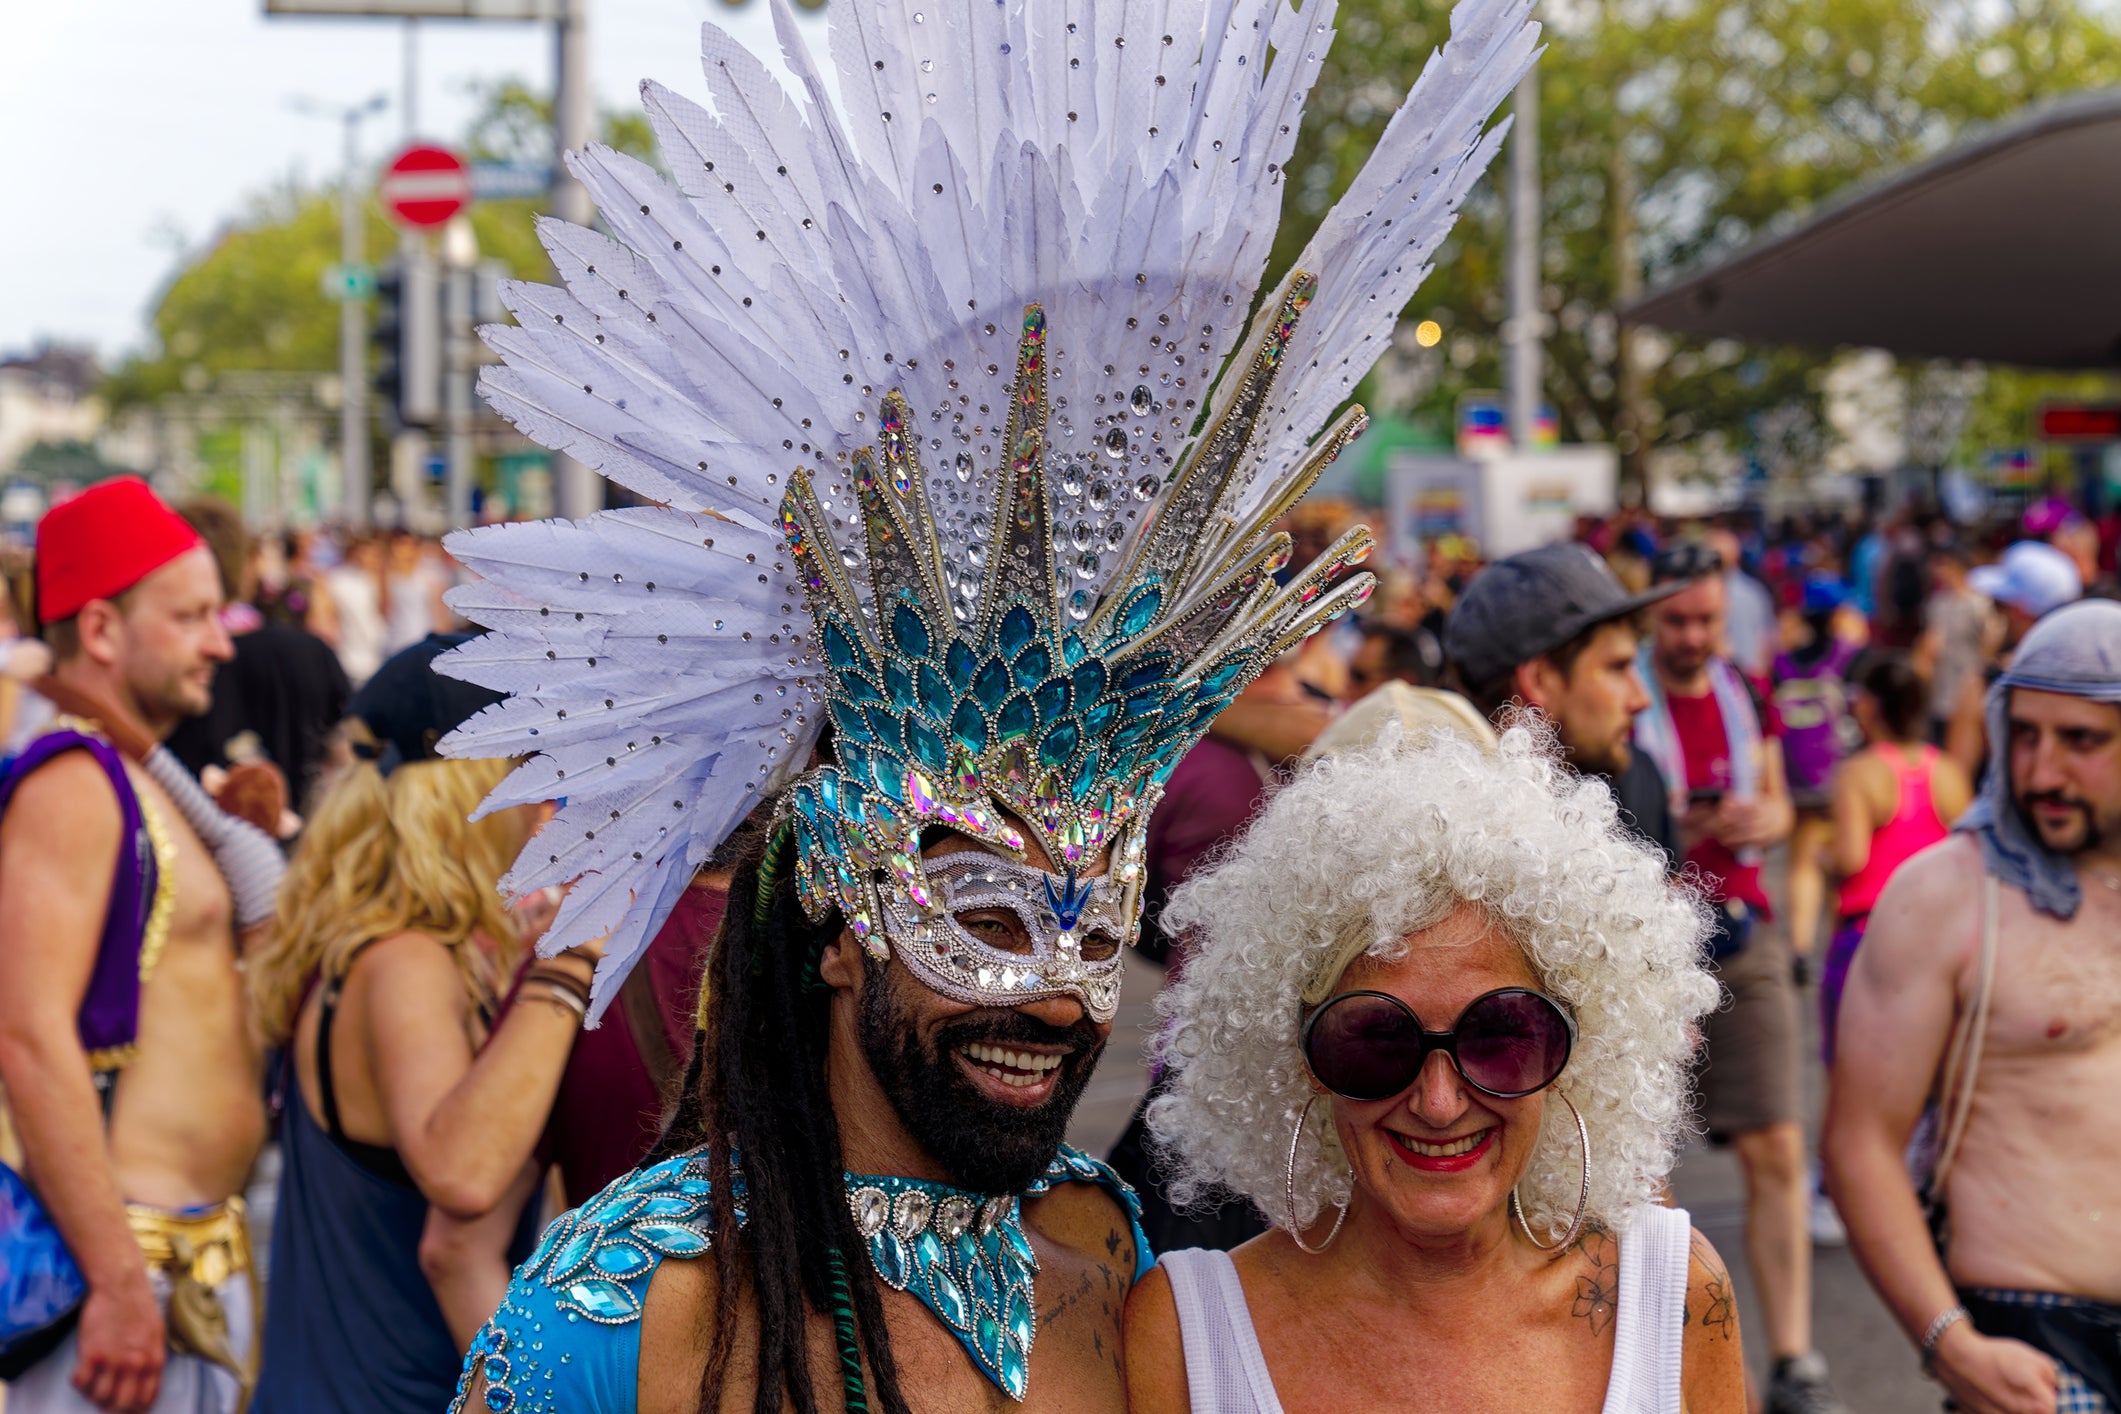 Don’t miss August’s vibrant Street Parade